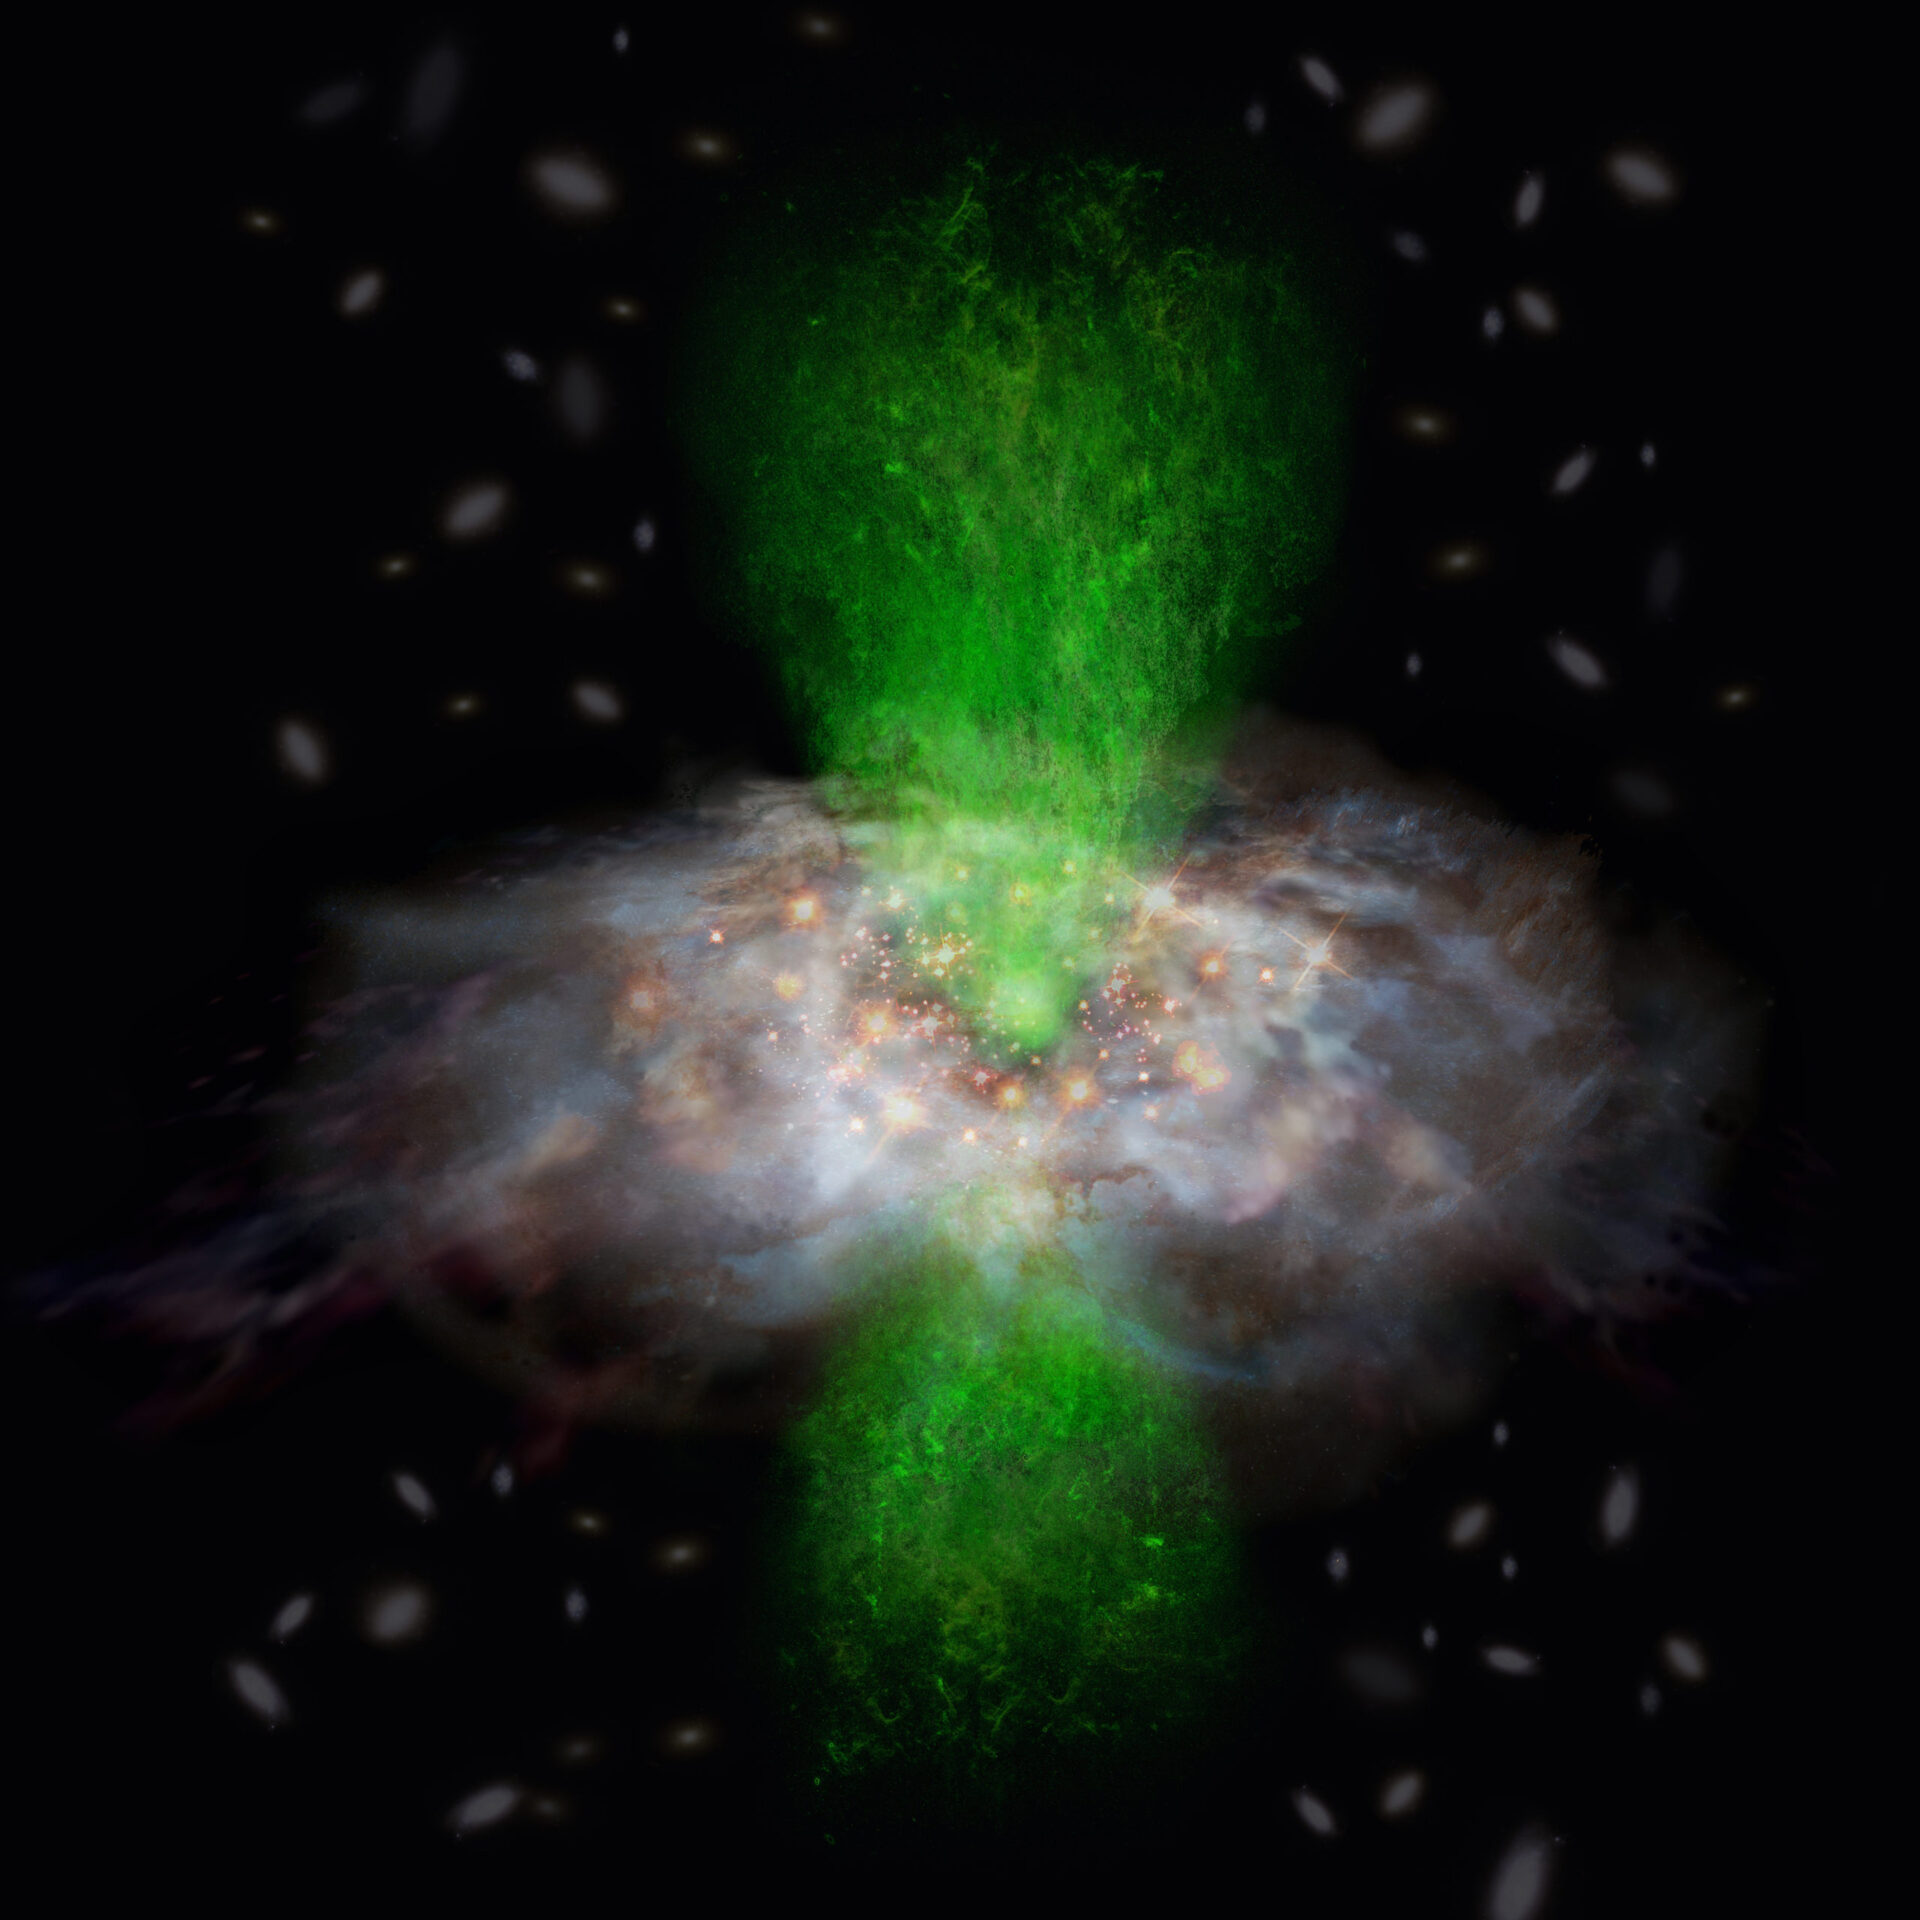 Supermassive black hole does not affect the star formation